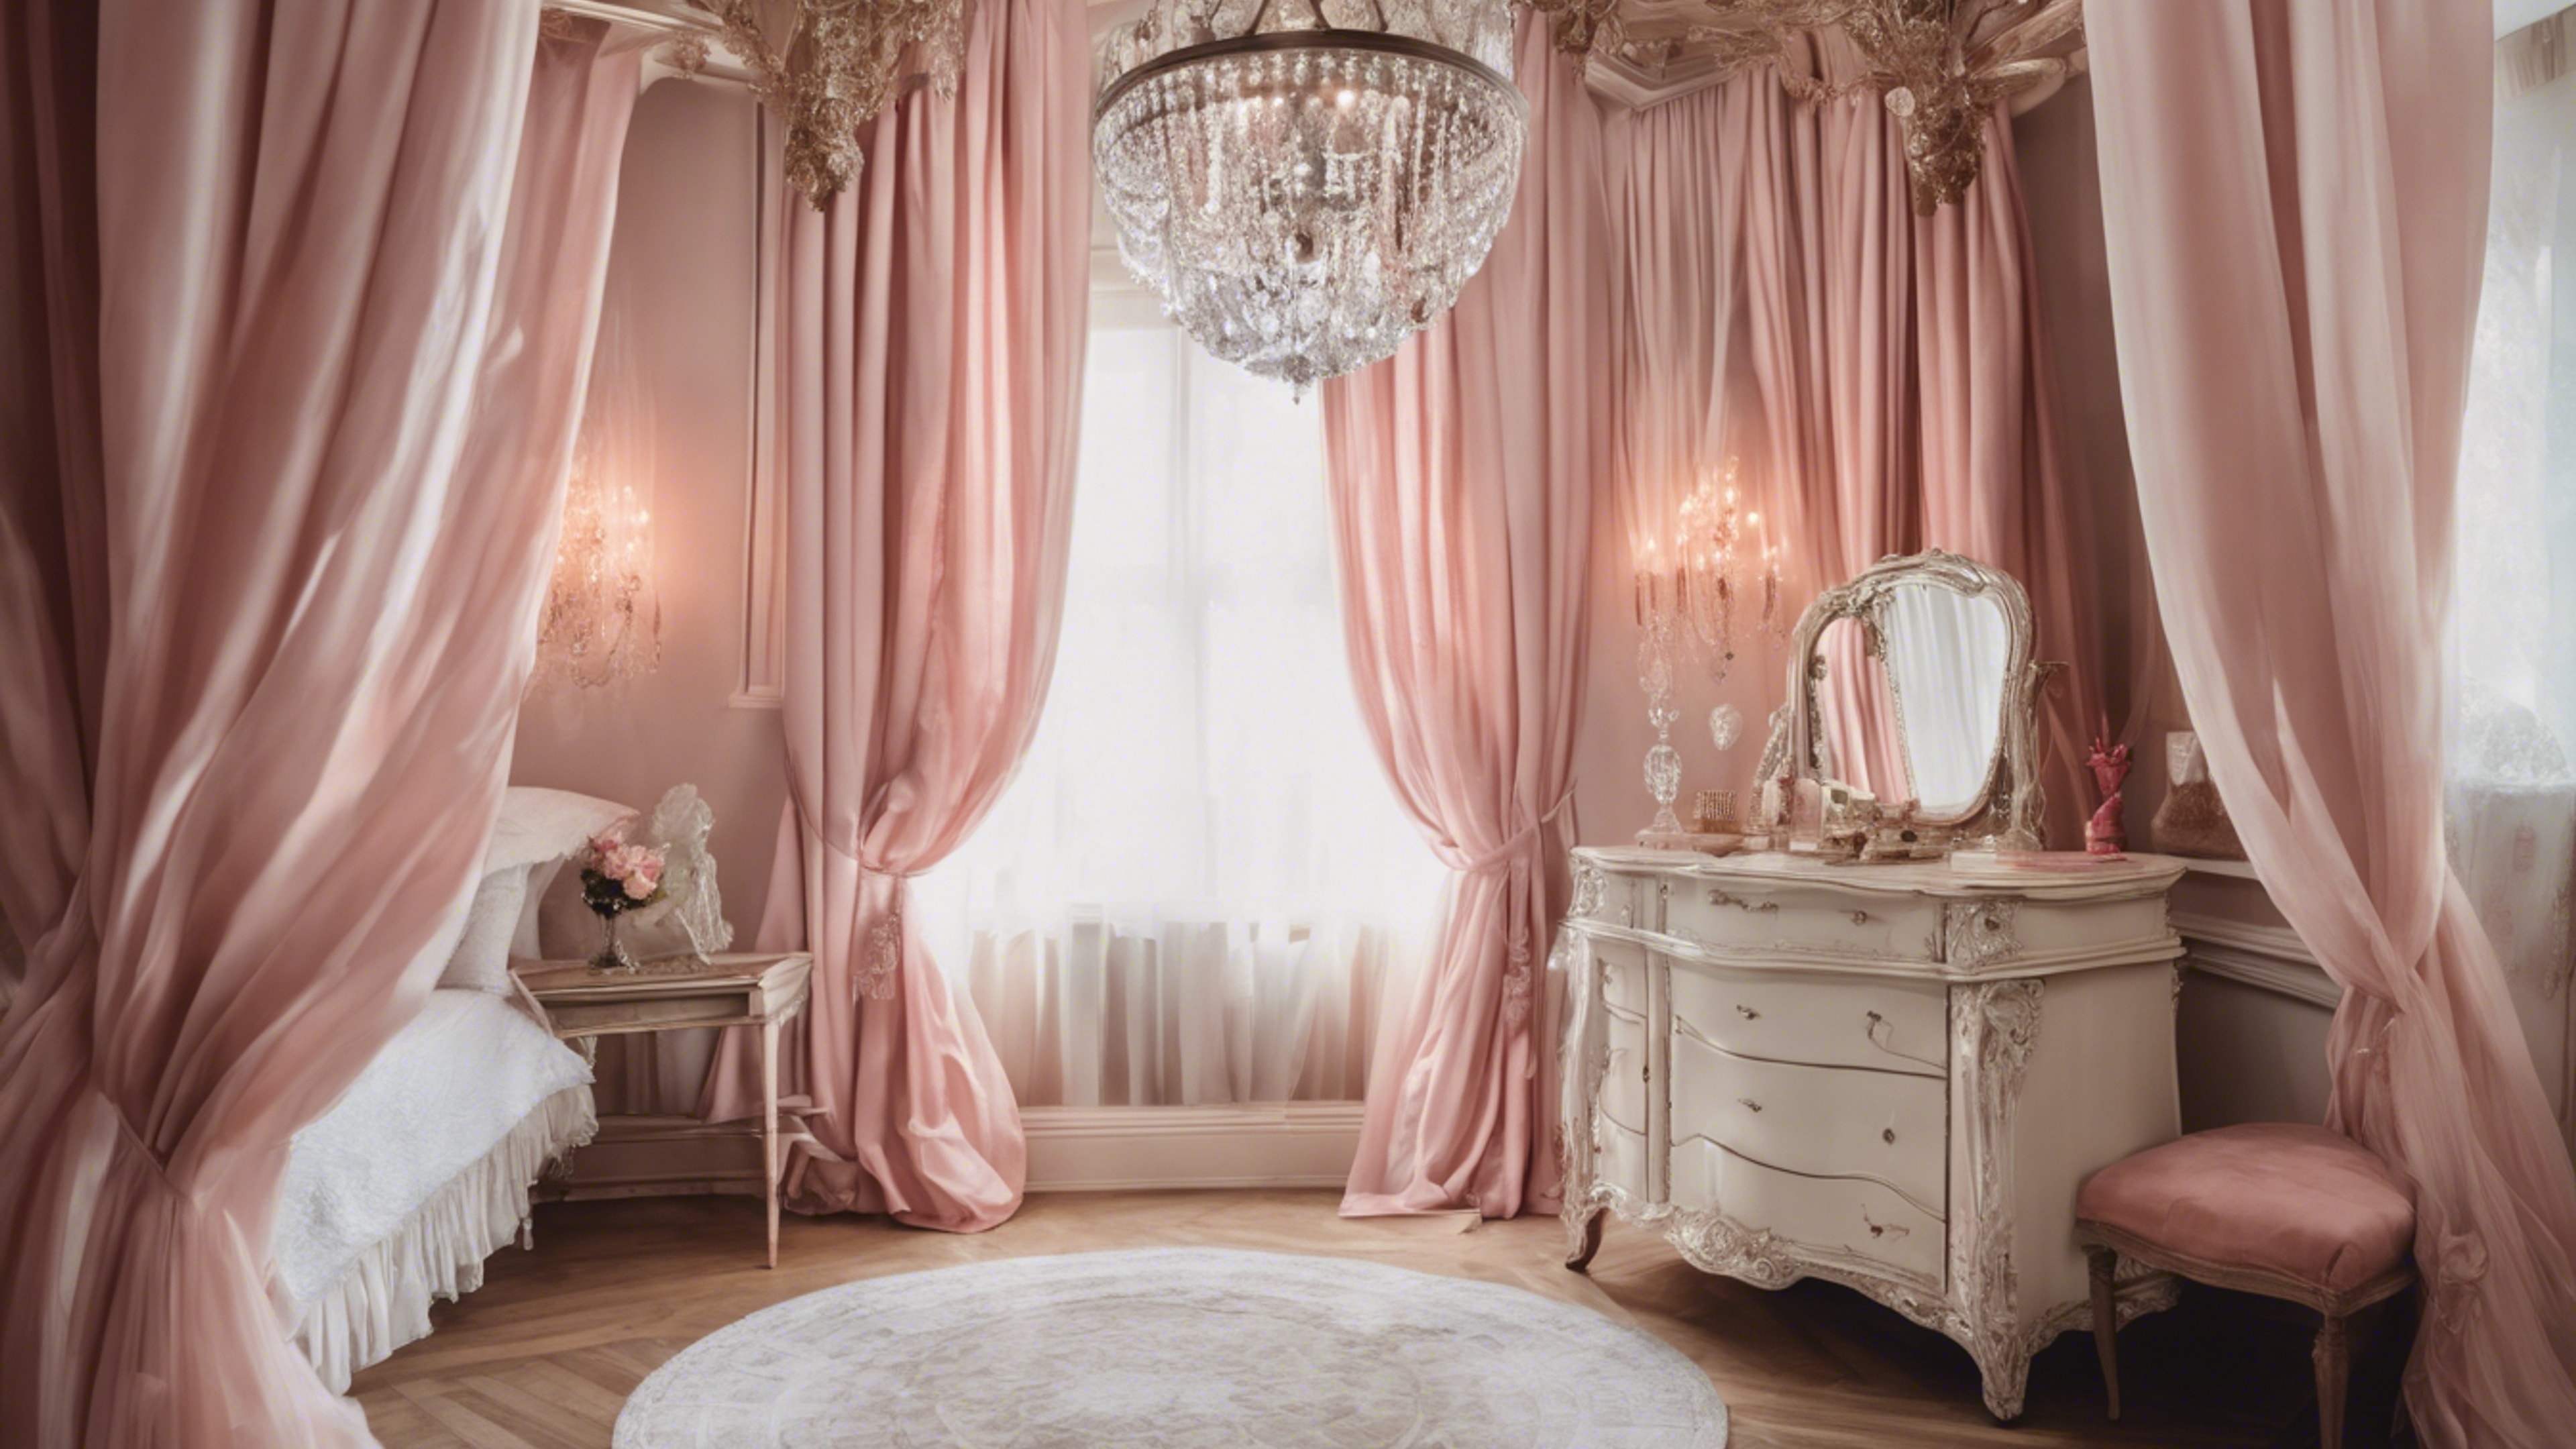 A feminine French bedroom, with canopy bed draped in soft-pink curtains, crystal chandelier hanging overhead, and an elegant antique vanity. Divar kağızı[9a96ceac1df24dd59ae9]